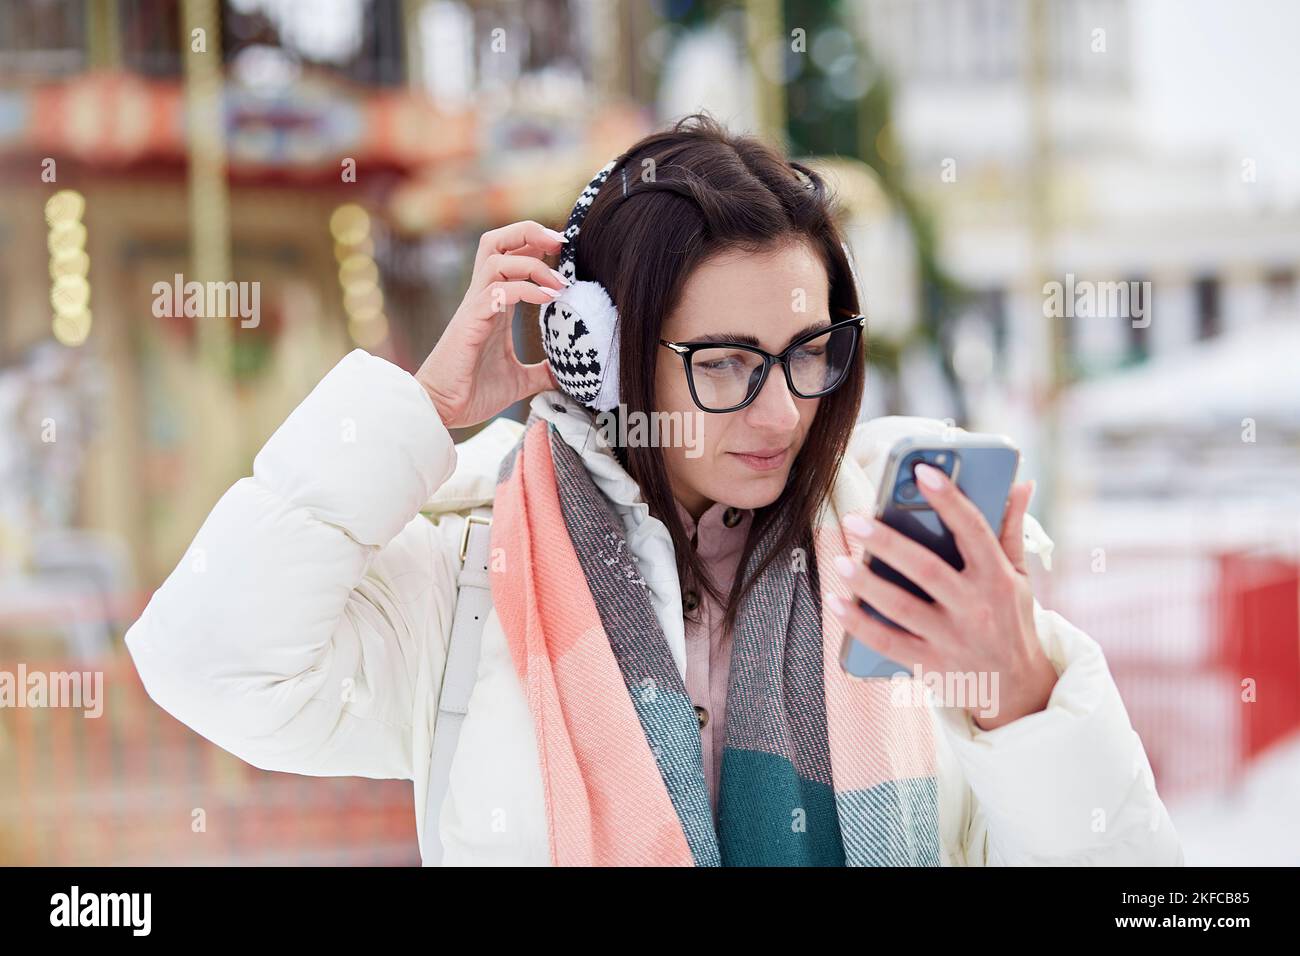 Portrait of young stylish woman making selfie outdoor at the New Year's fair. Winter fun. Good mood. Authentic lifestyle. Stock Photo